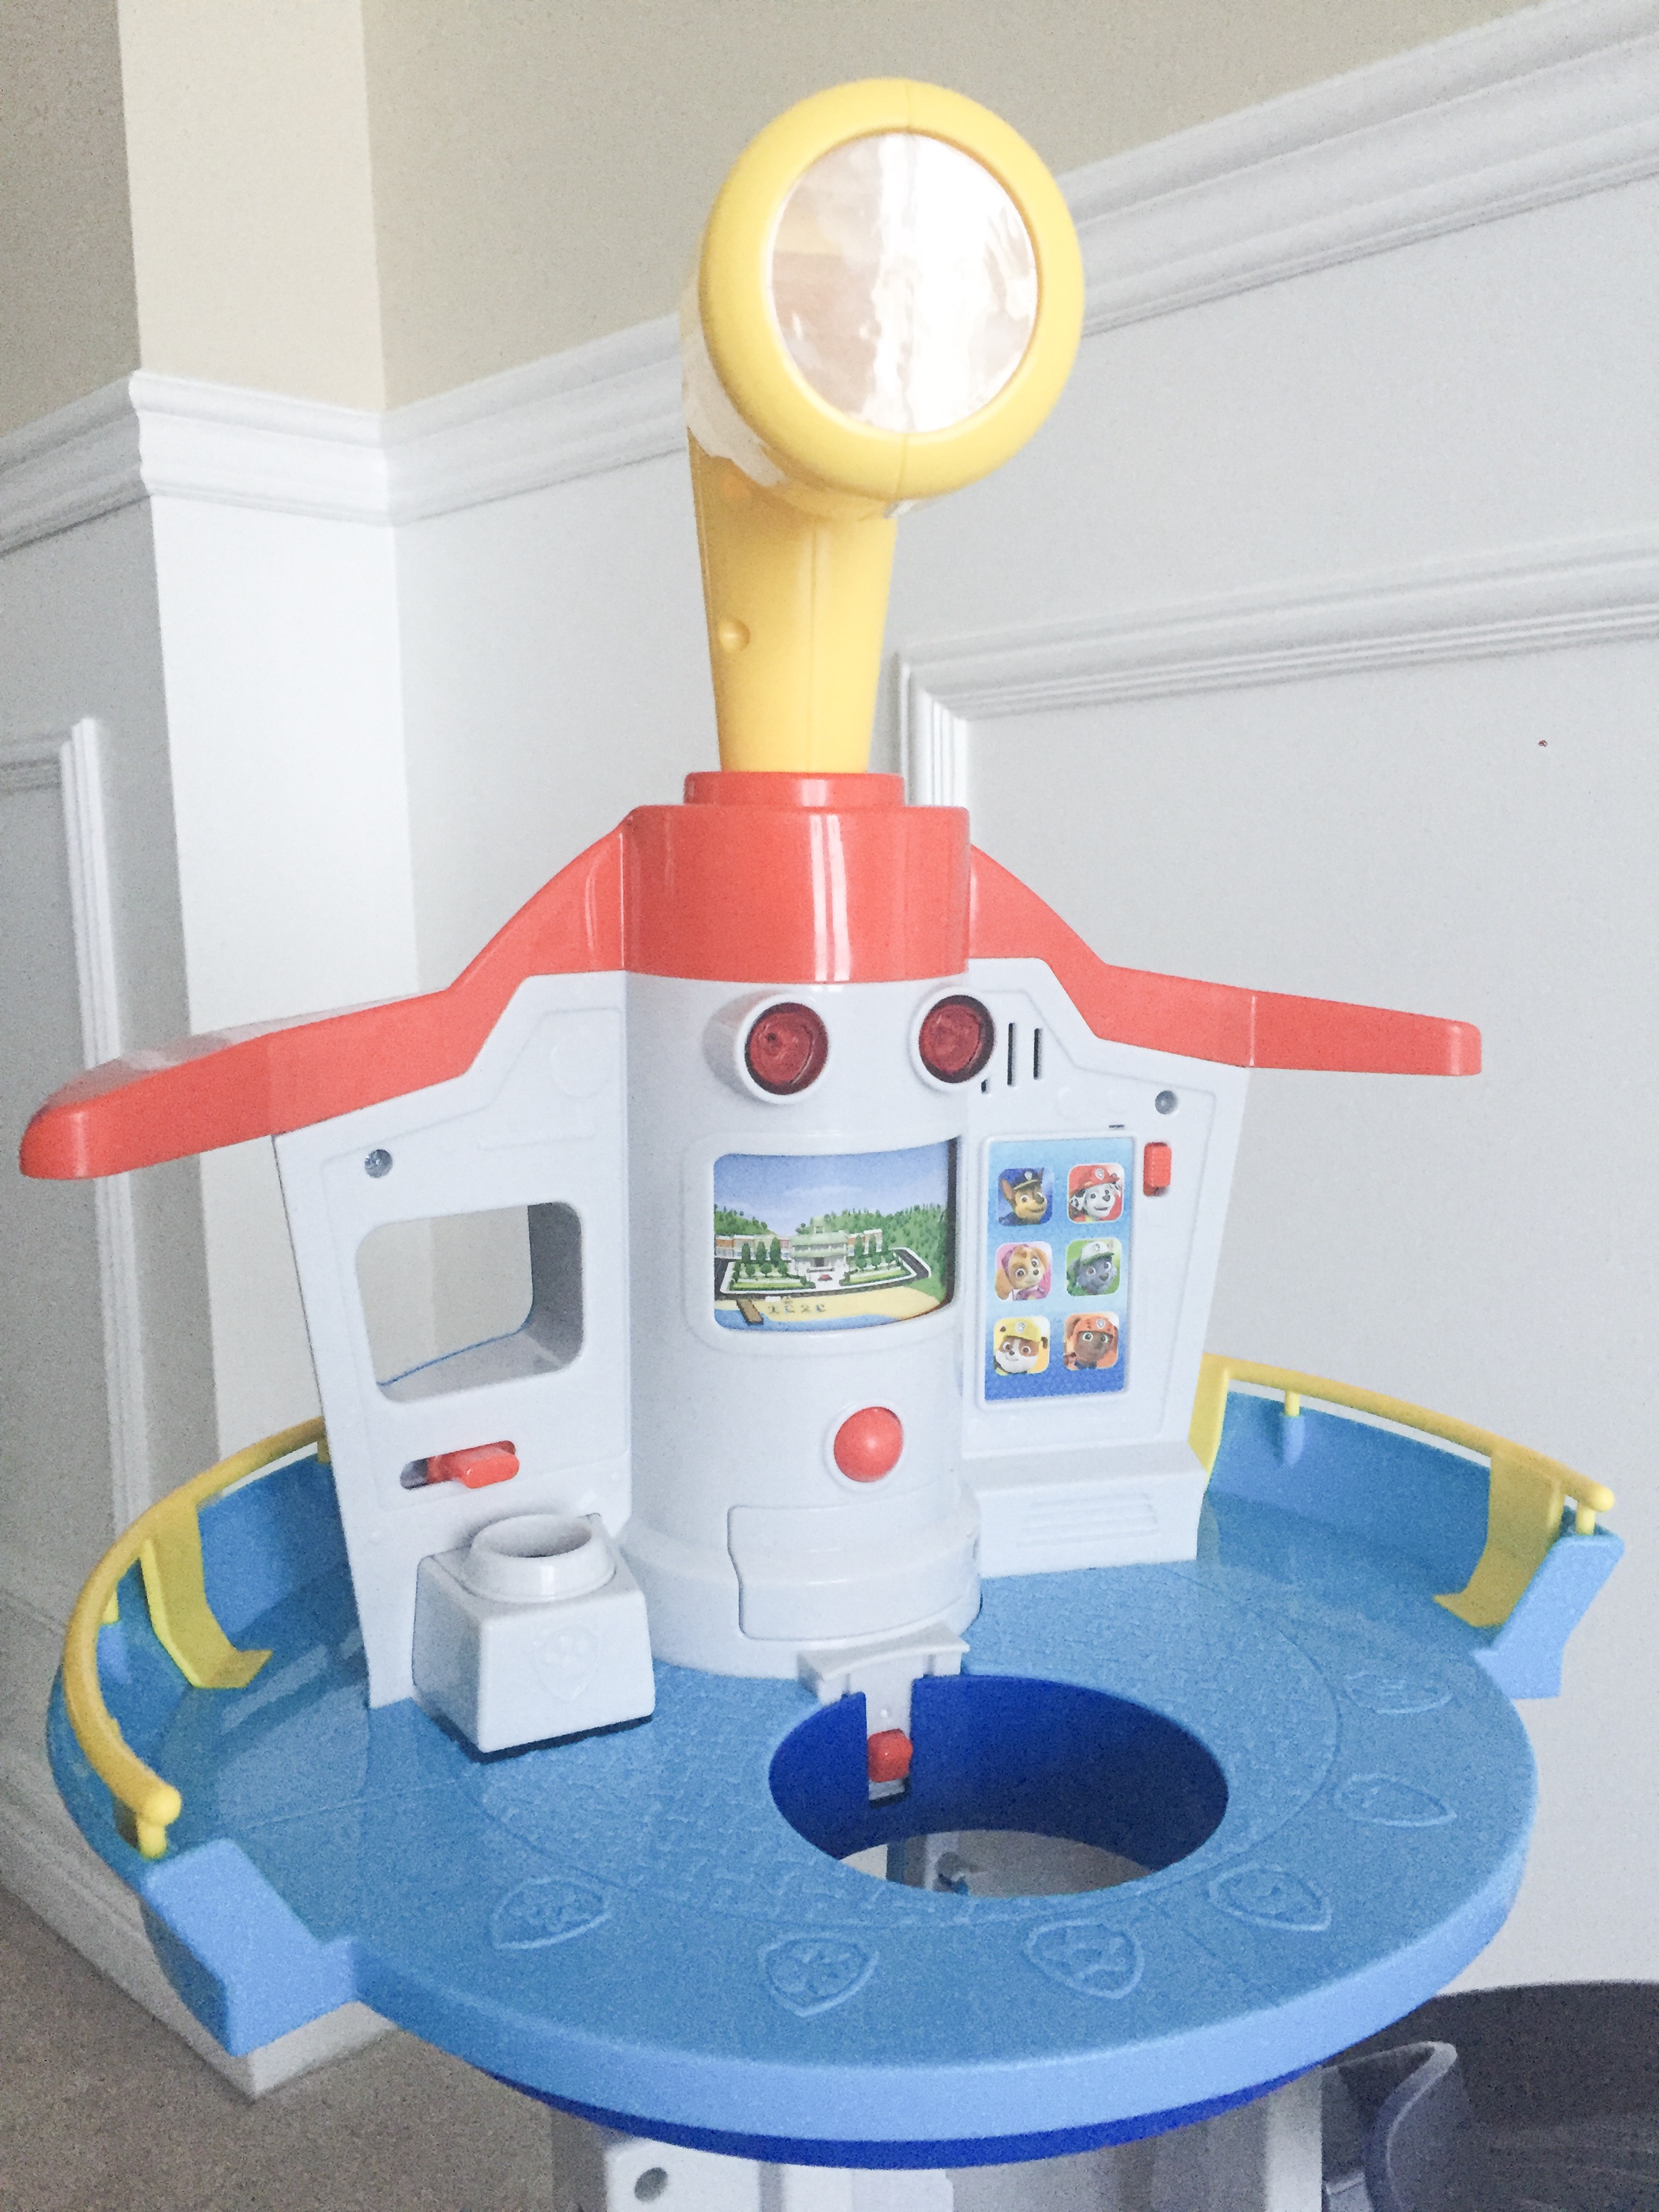 Review on the PAW Patrol My Size Lookout tower from Spinmaster